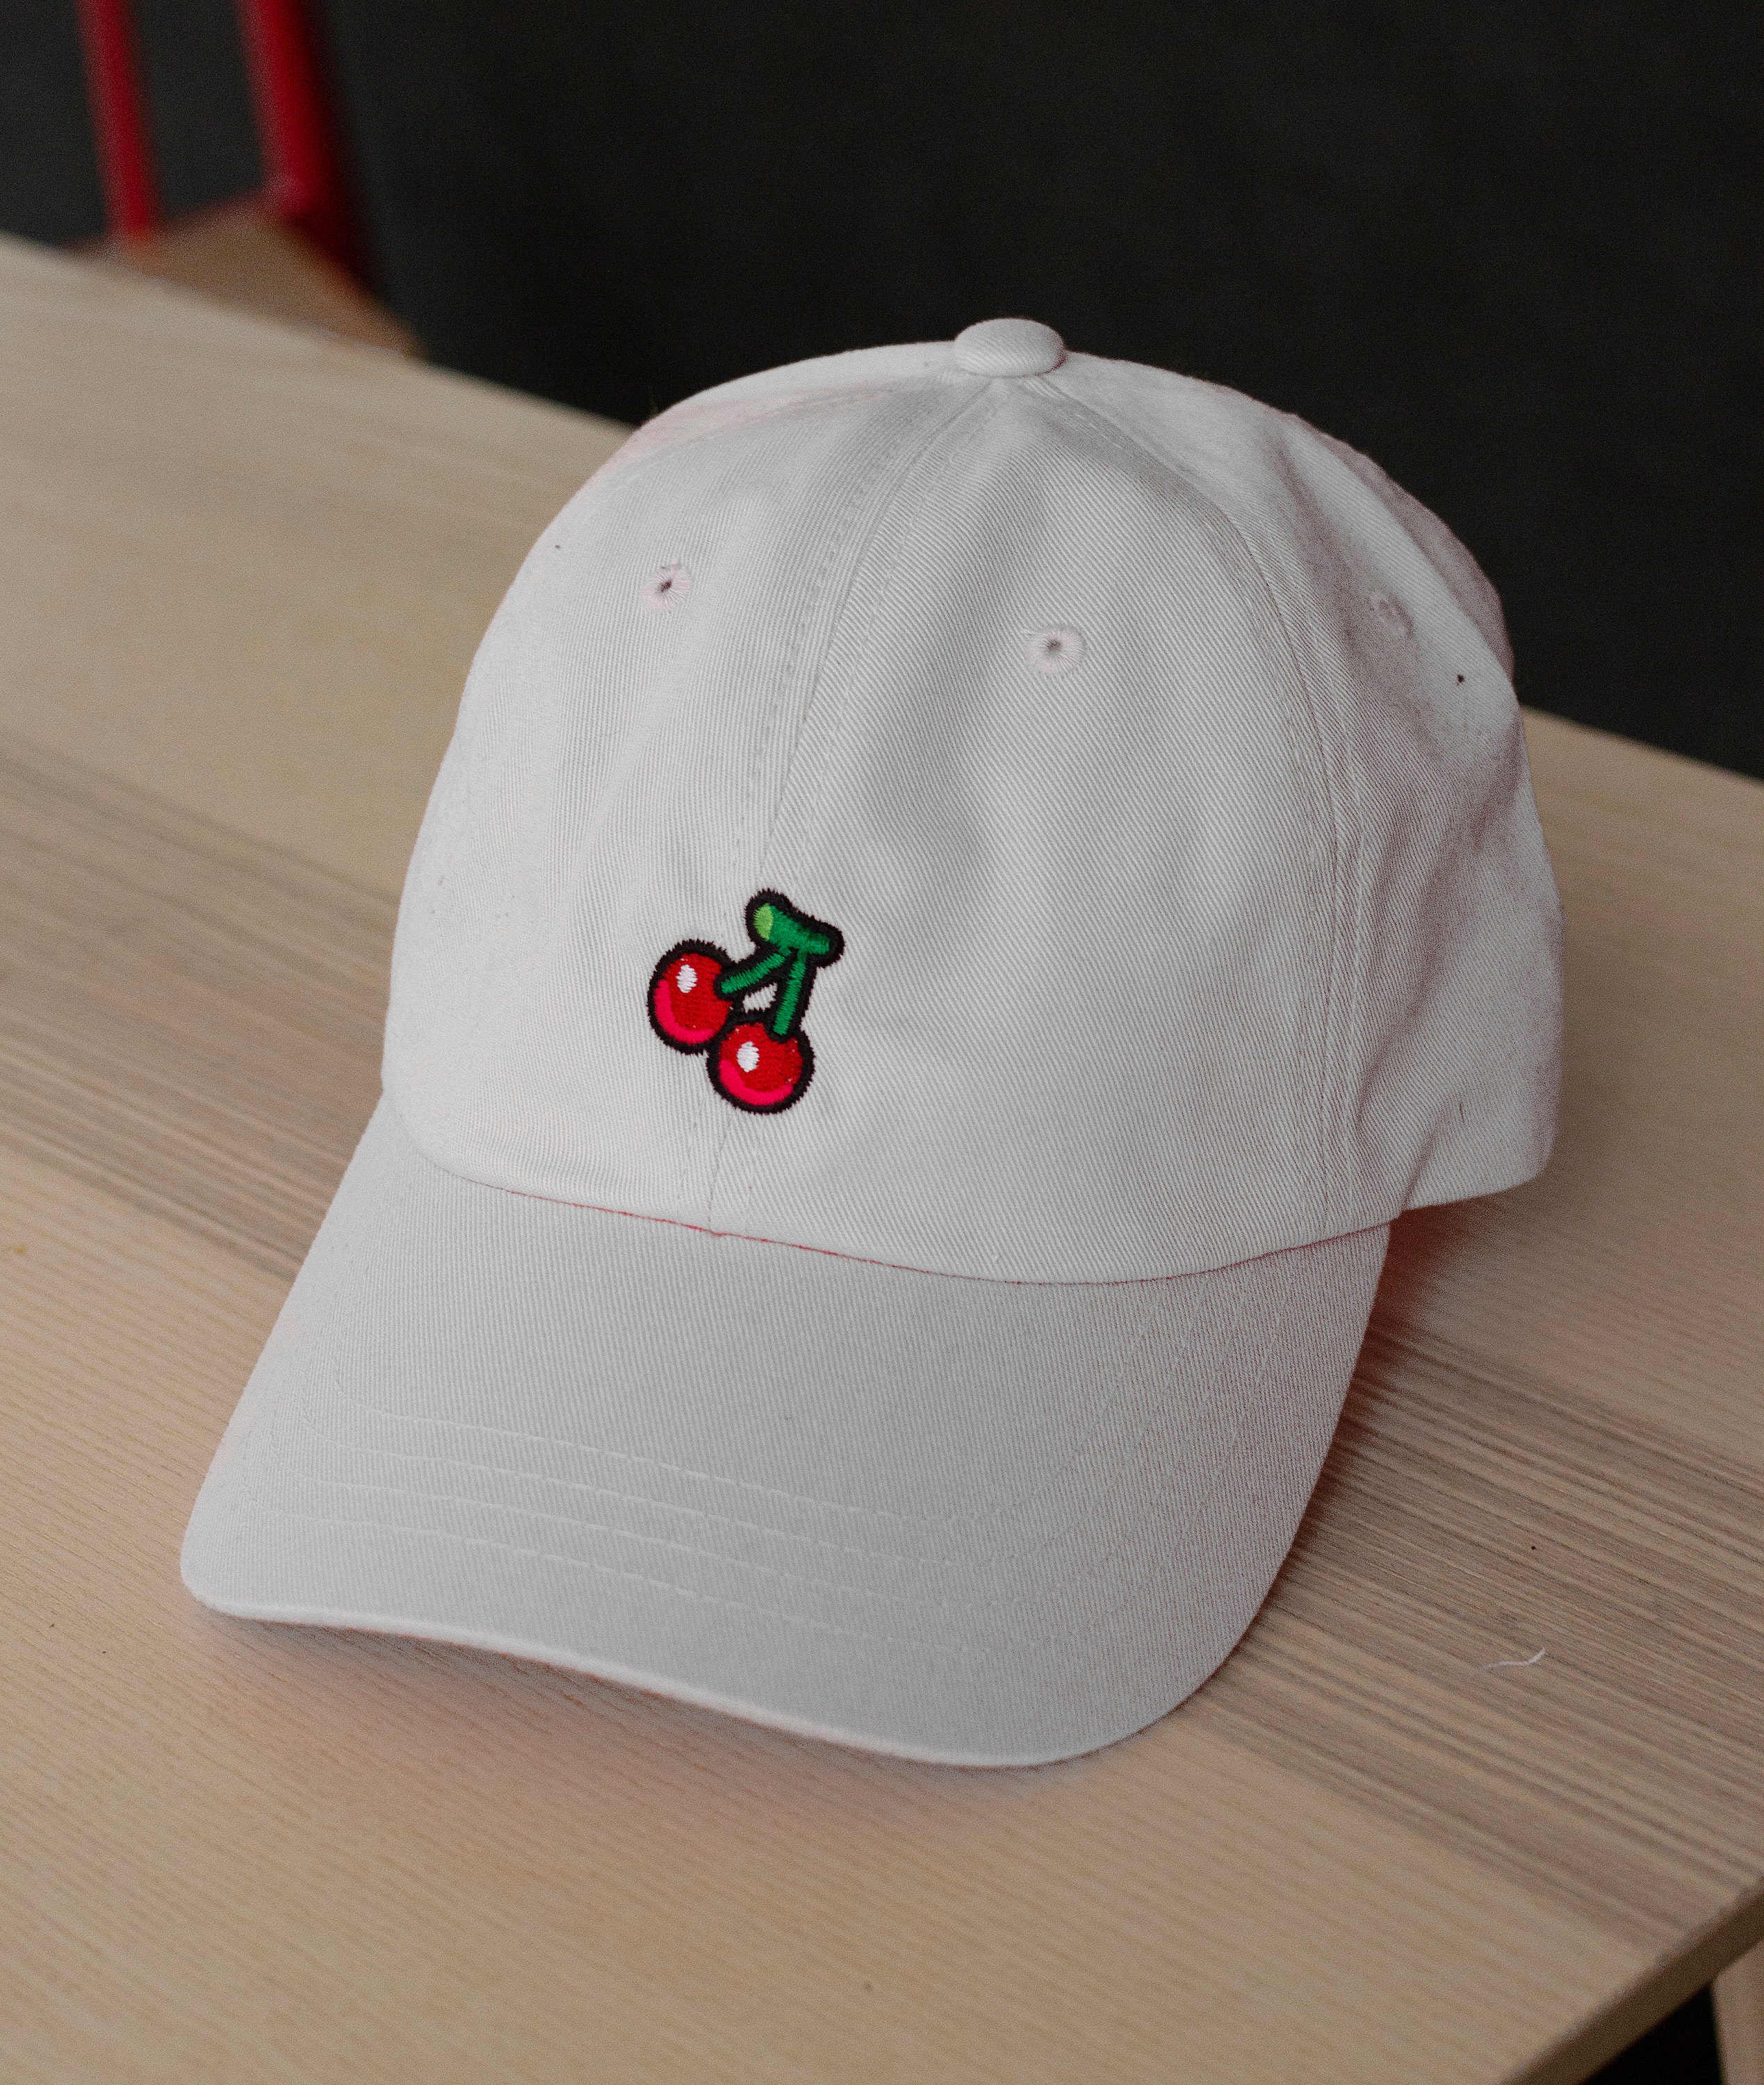 Animal Crossing Cherry Fruit Embroidered Hat | Etsy